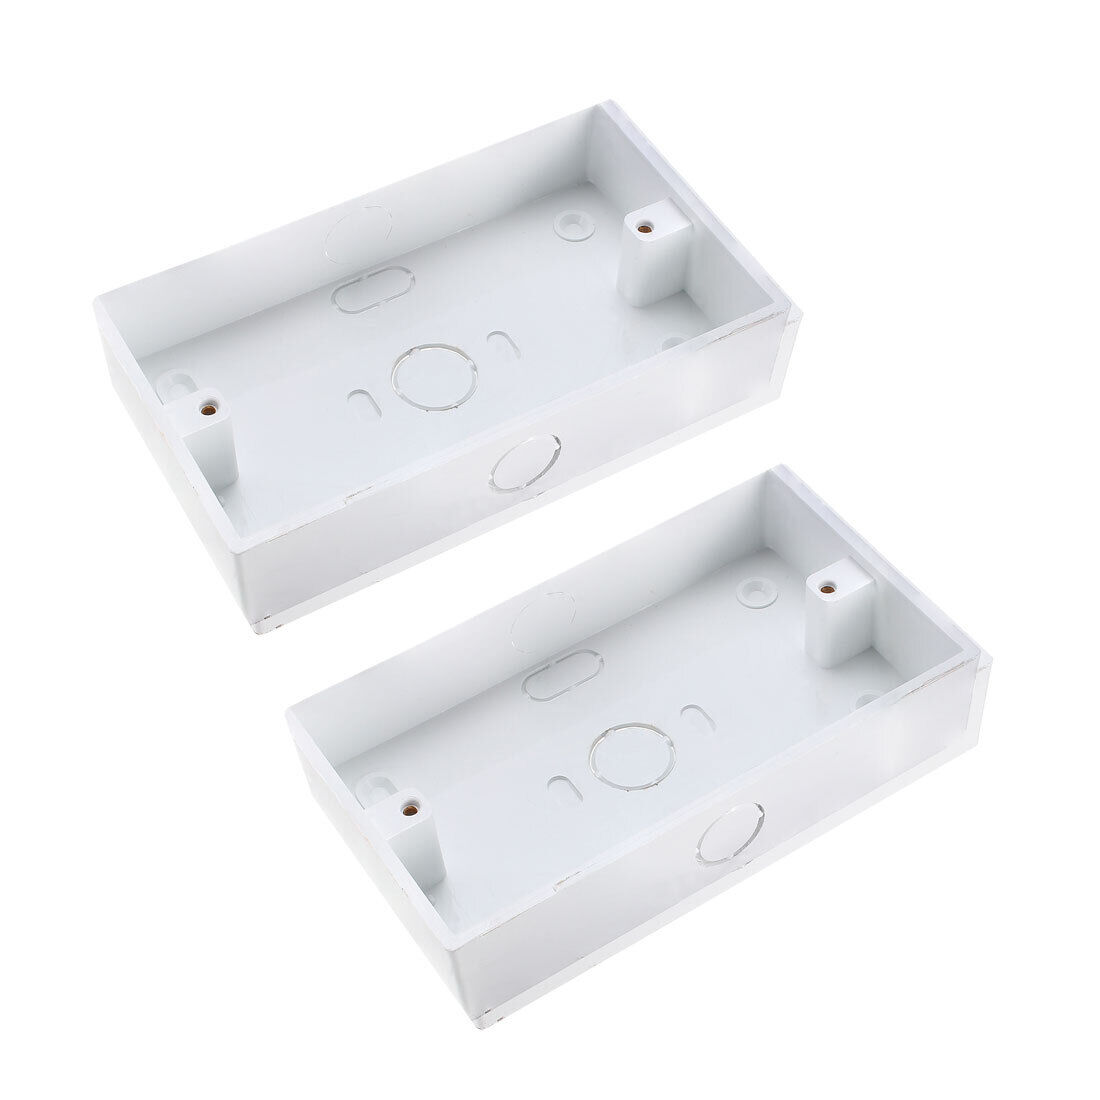 2pcs Wall Switch Box 146 x 85 x 32mm Electrical Outlet Surface Mount Single Gang